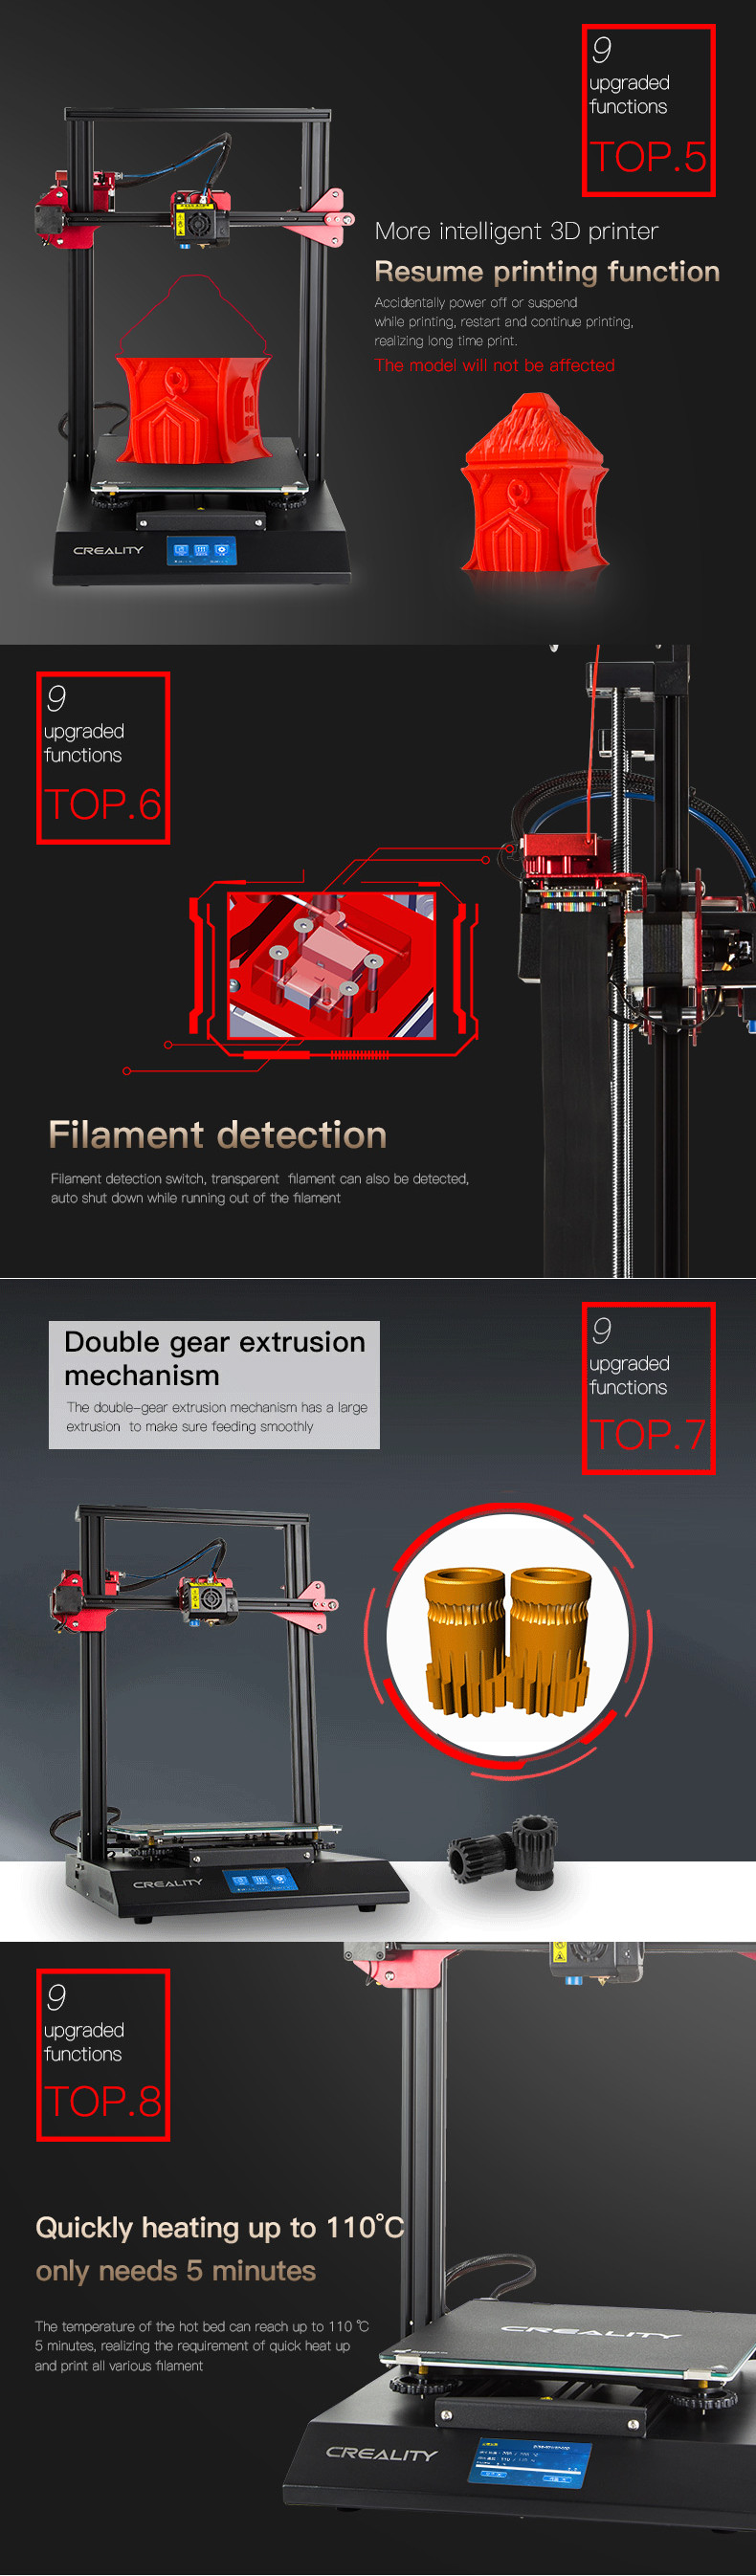 Creality 3D® CR-10S Pro DIY 3D Printer Kit 300*300*400mm Printing Size With Auto Leveling Sensor/Dual Gear Extrusion/4.3inch Touch LCD/Resume Printing 17